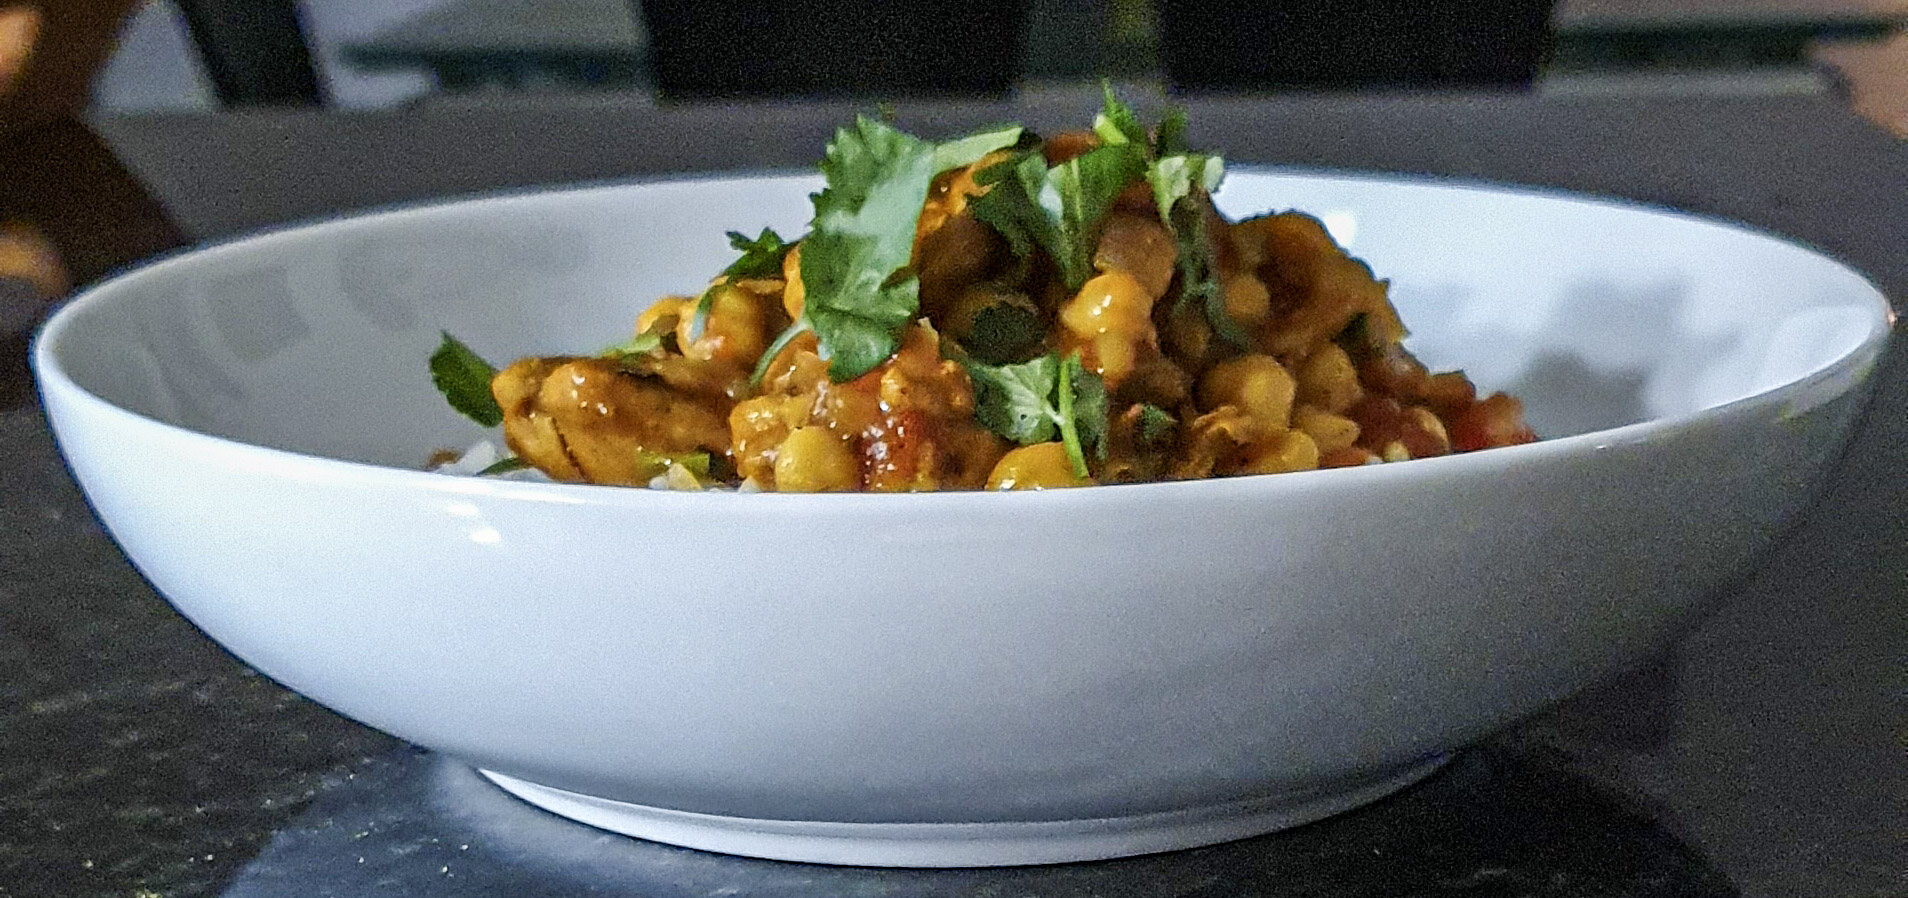 Chicken & Chickpea curry - The Mayfair Foodie